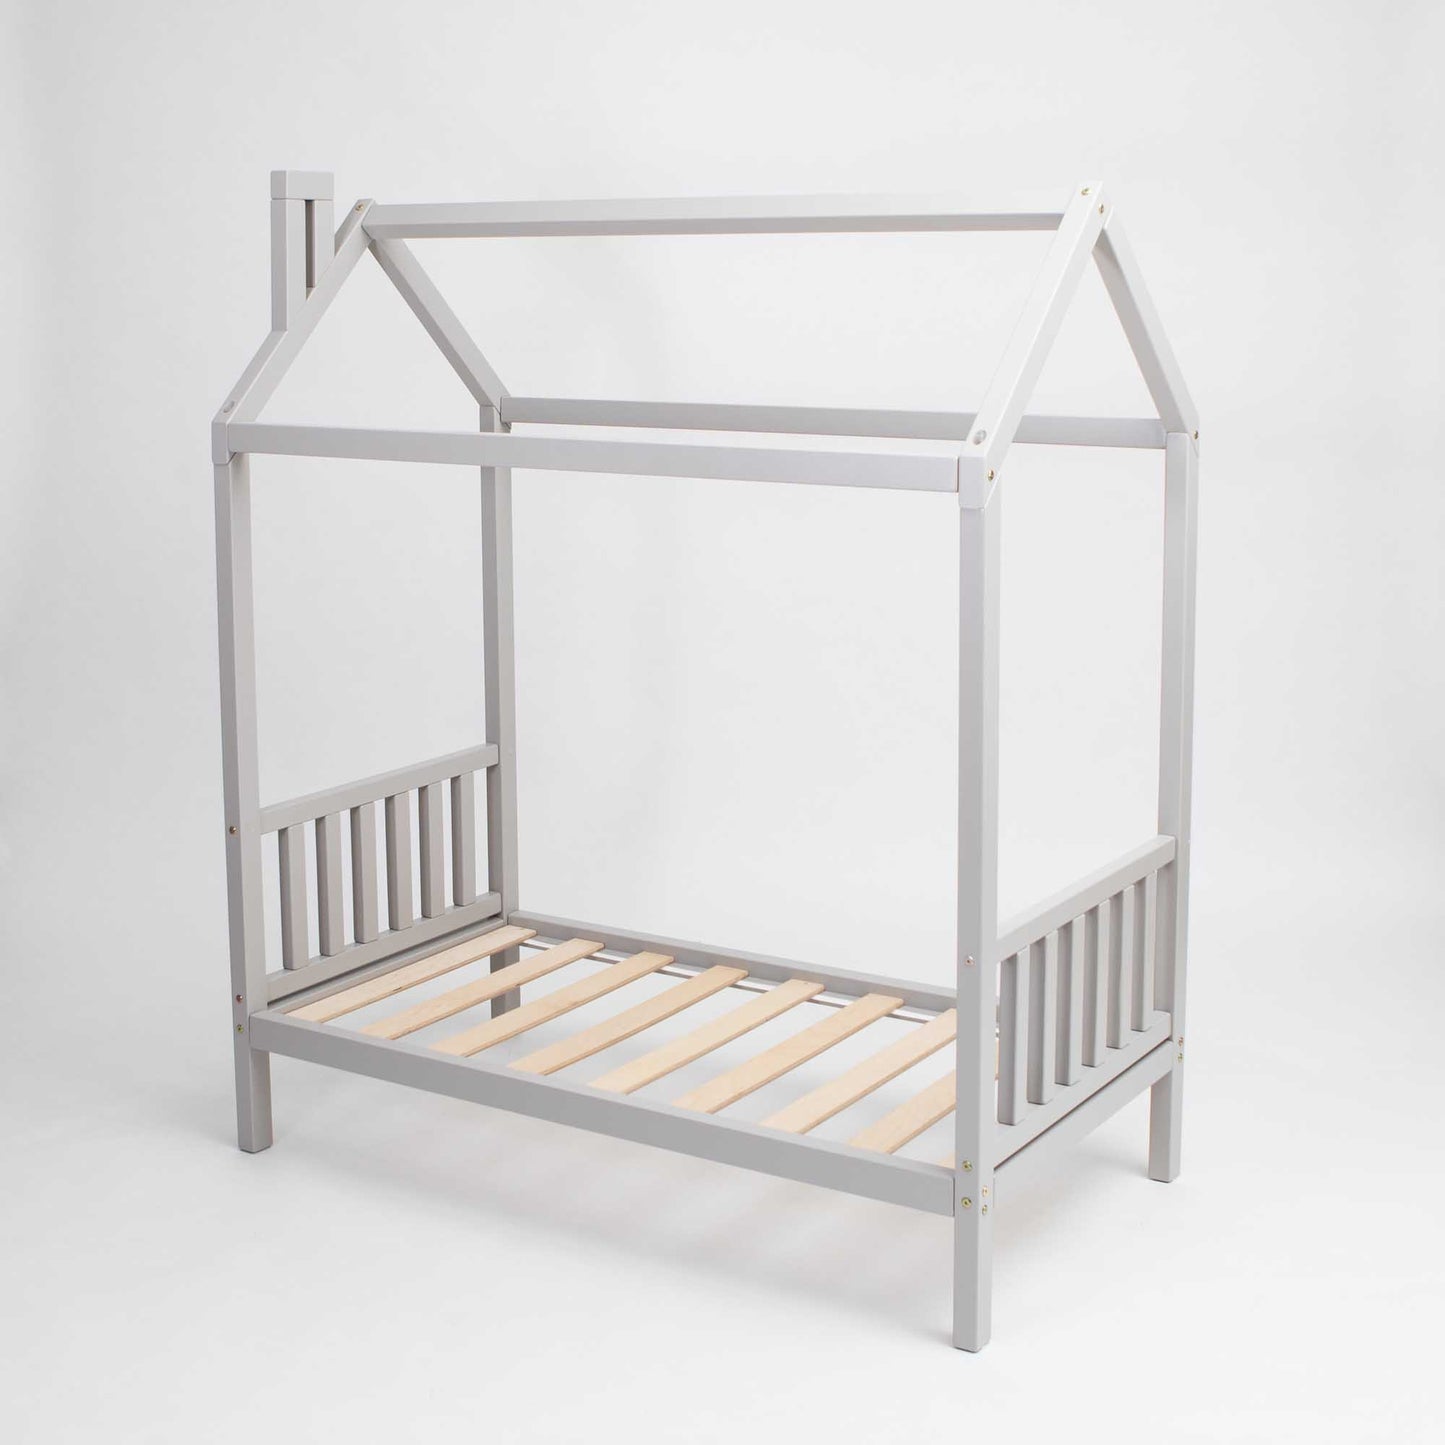 A Toddler house bed on legs with a headboard and footboard with a grey frame and raised wooden slats.